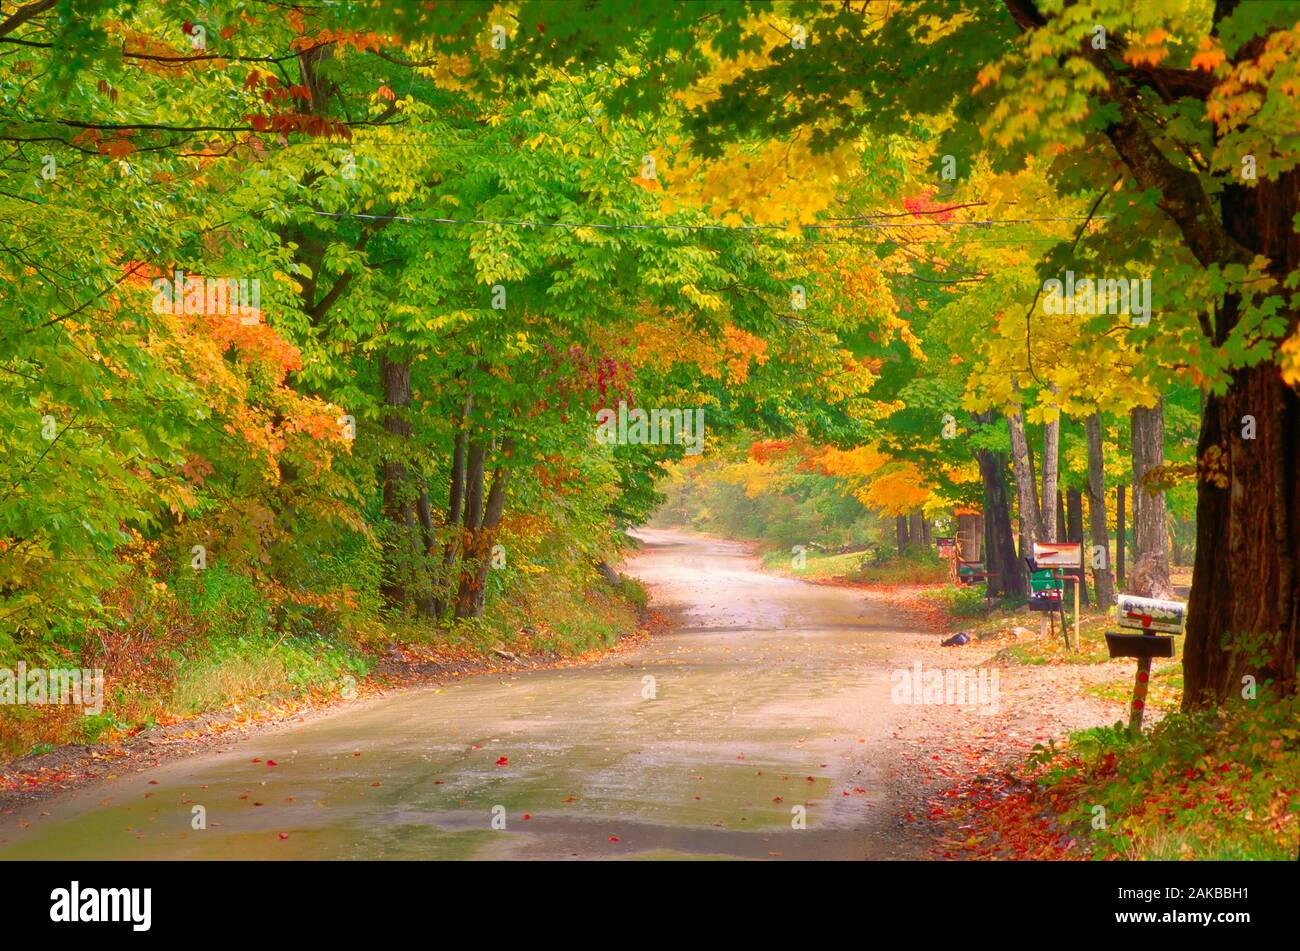 Country road with trees on sides in autumn, Bennington, Vermont, USA Stock Photo